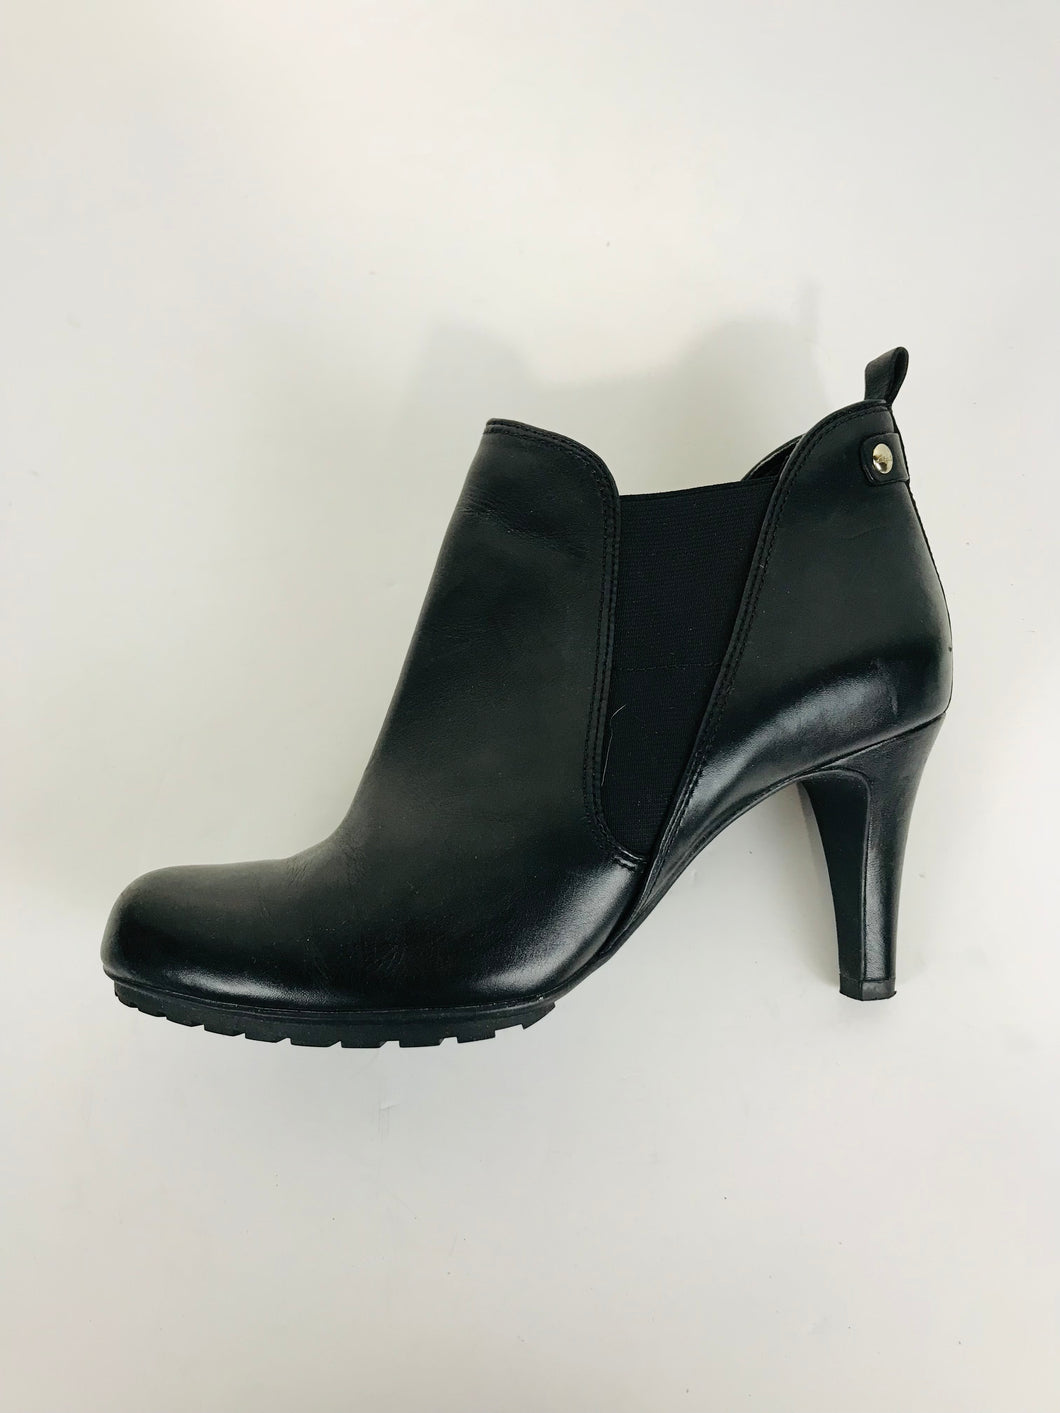 Clarks Women's Ankle Heeled Boots | UK6 | Black